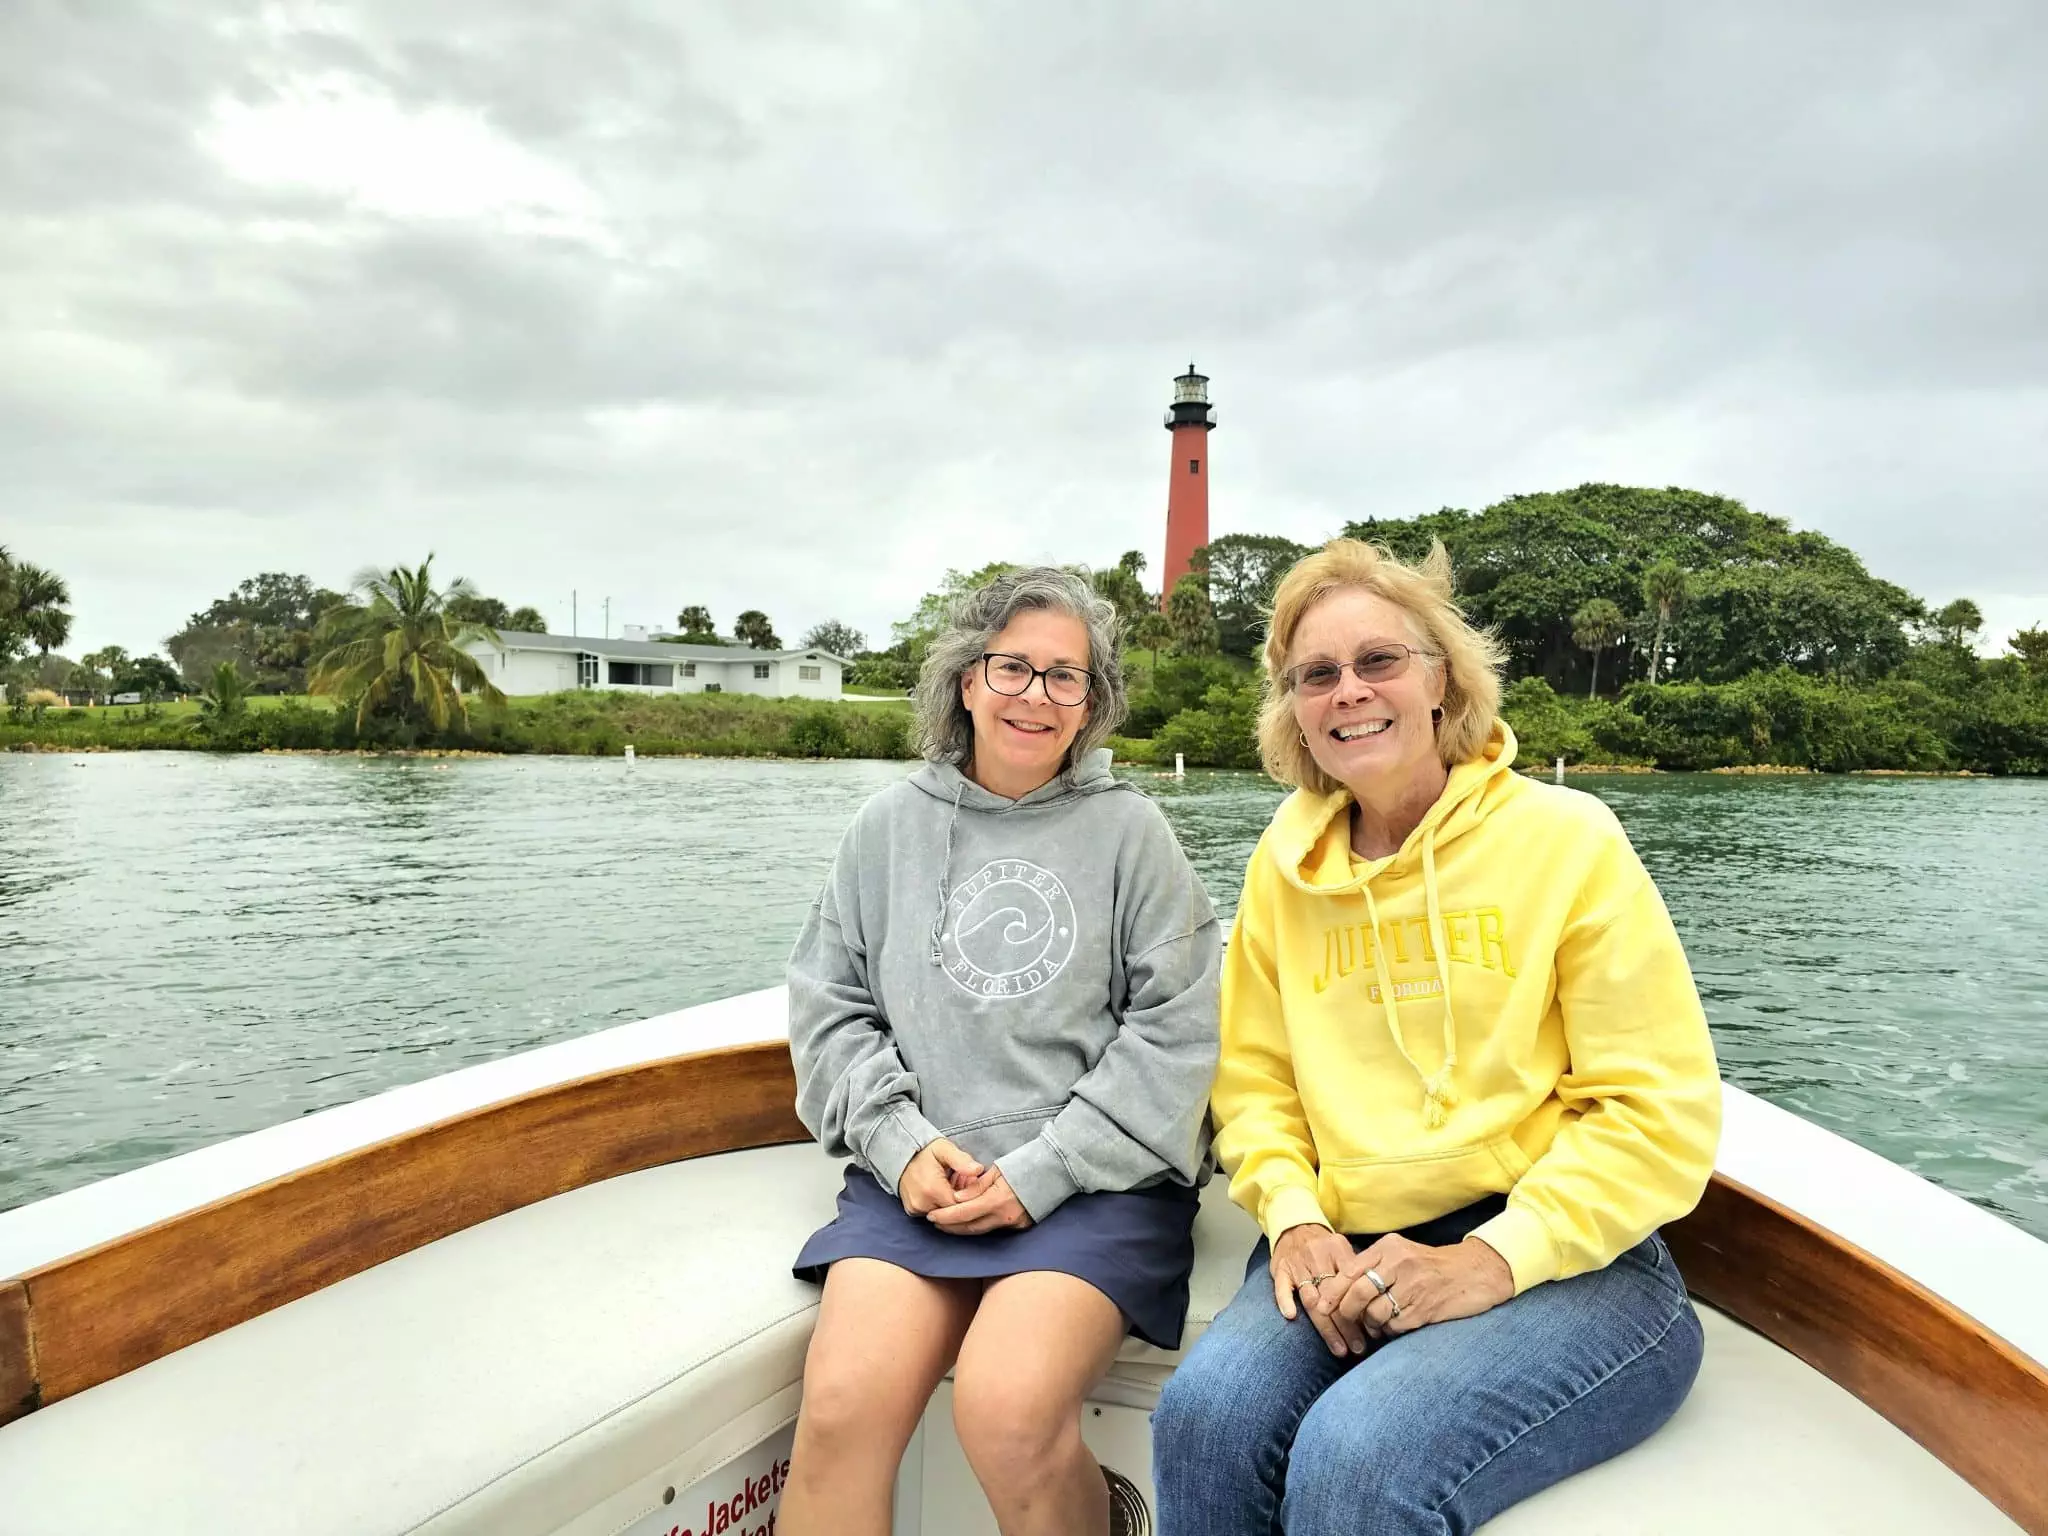 Two women enjoy a scenic holiday boat tour, sitting on a boat in front of a majestic lighthouse.